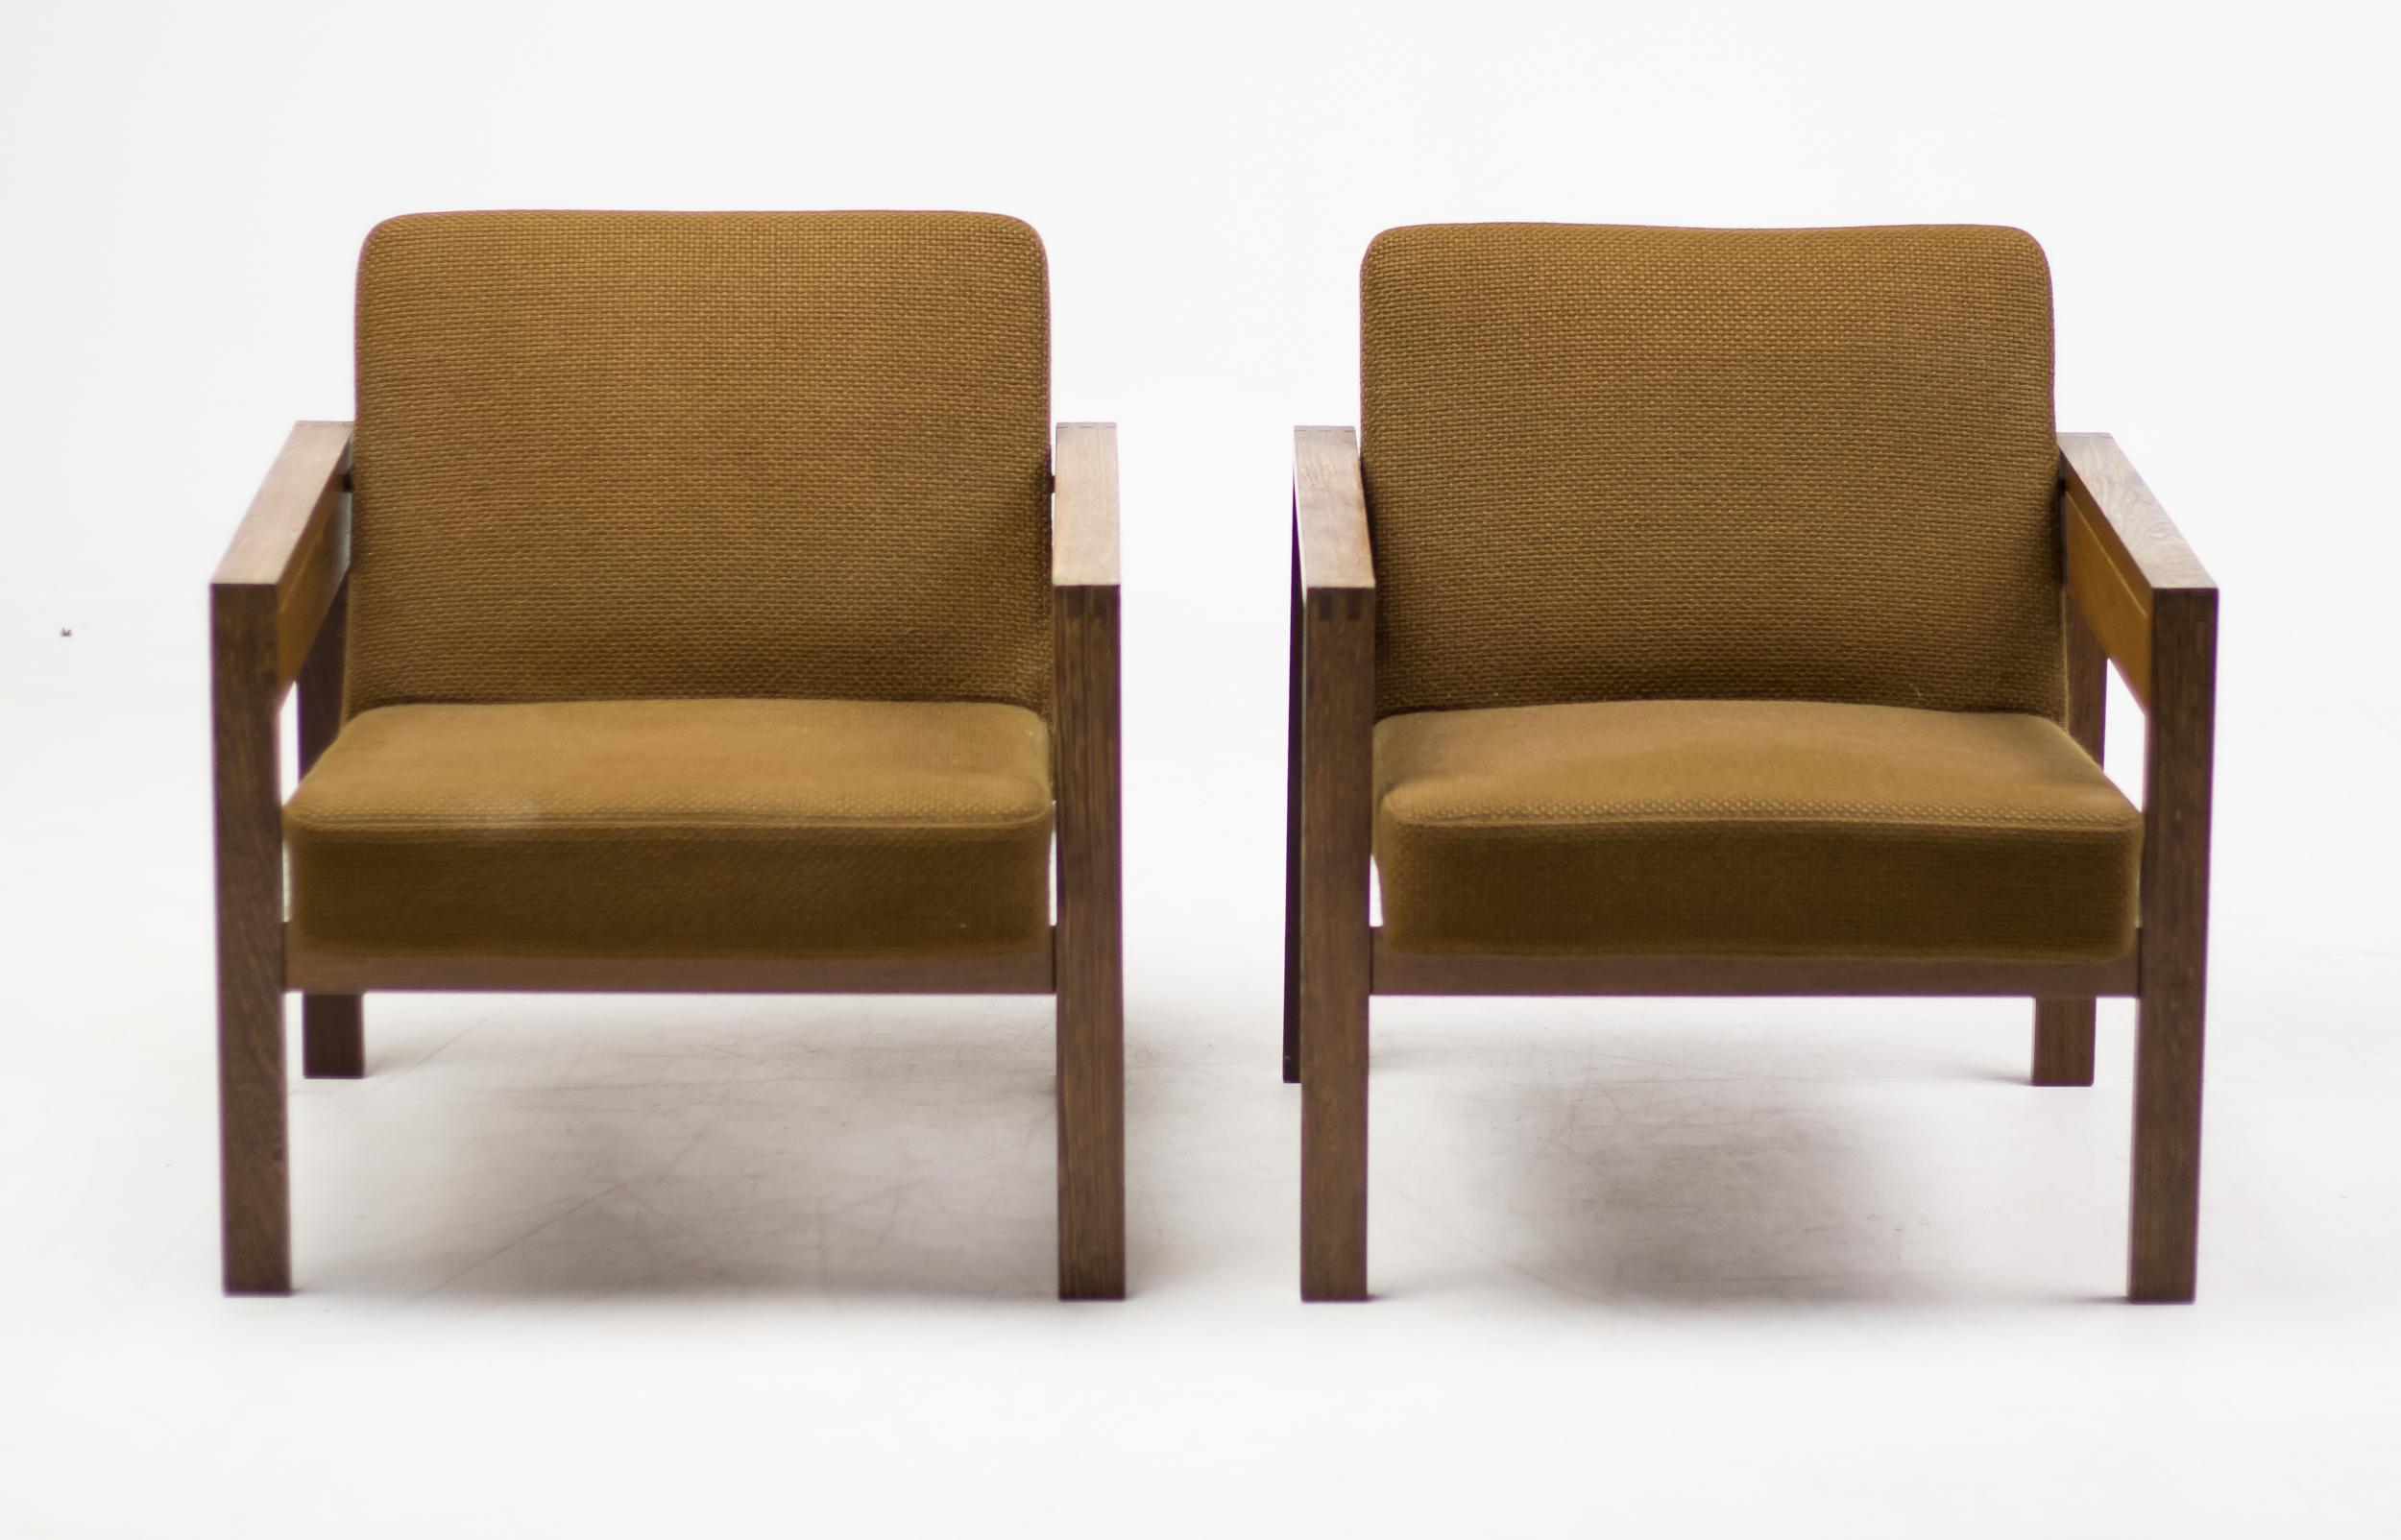 Set of armchairs designed by the Dutch architect Hein Stolle for Spectrum, the Netherlands, in unrestored original condition. Wengé frame and original De Ploeg wool fabric. The foam is still resilient and the fabric doesn't have any stains or